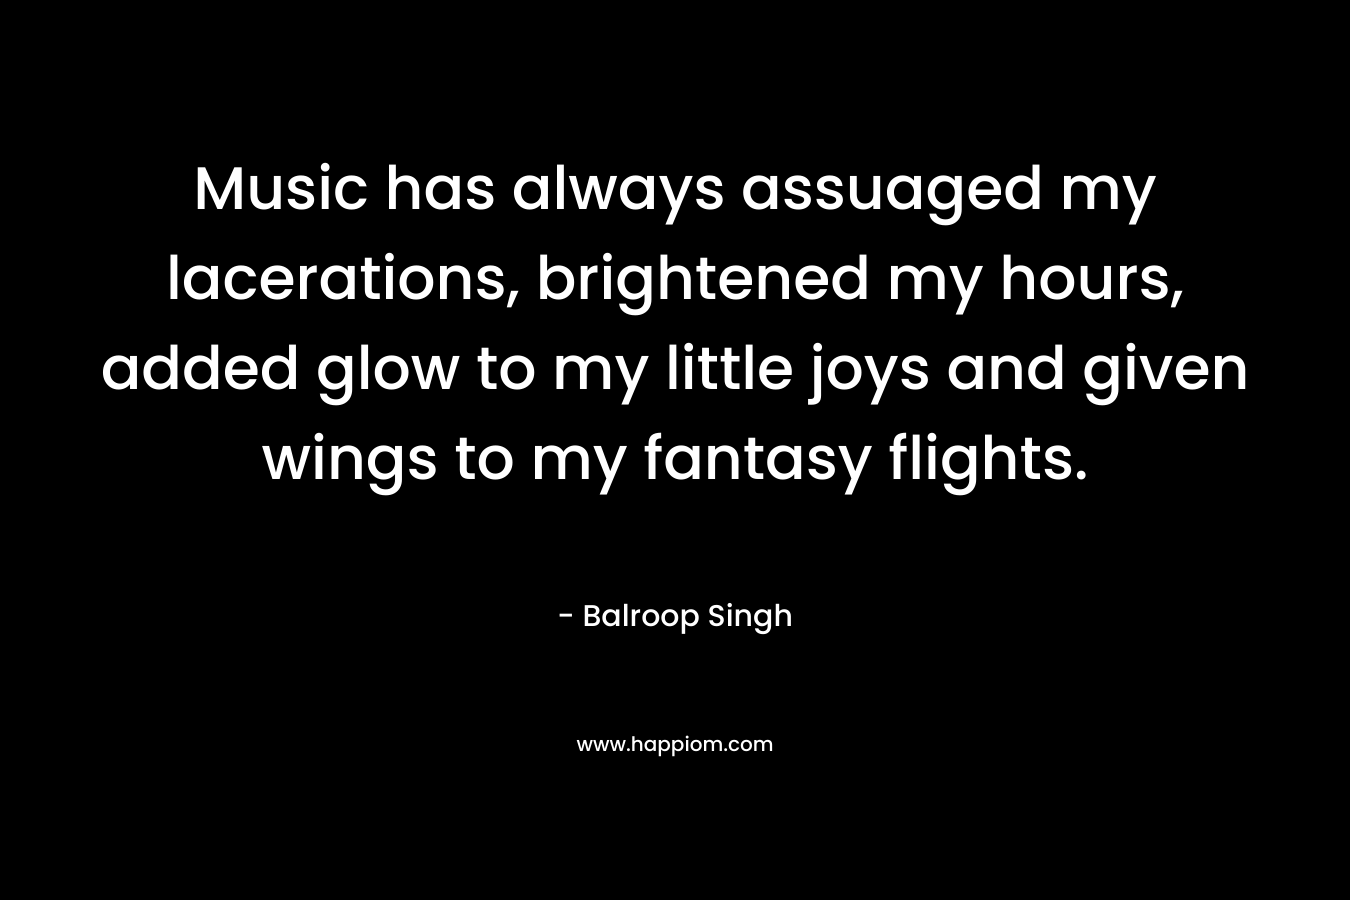 Music has always assuaged my lacerations, brightened my hours, added glow to my little joys and given wings to my fantasy flights. – Balroop Singh